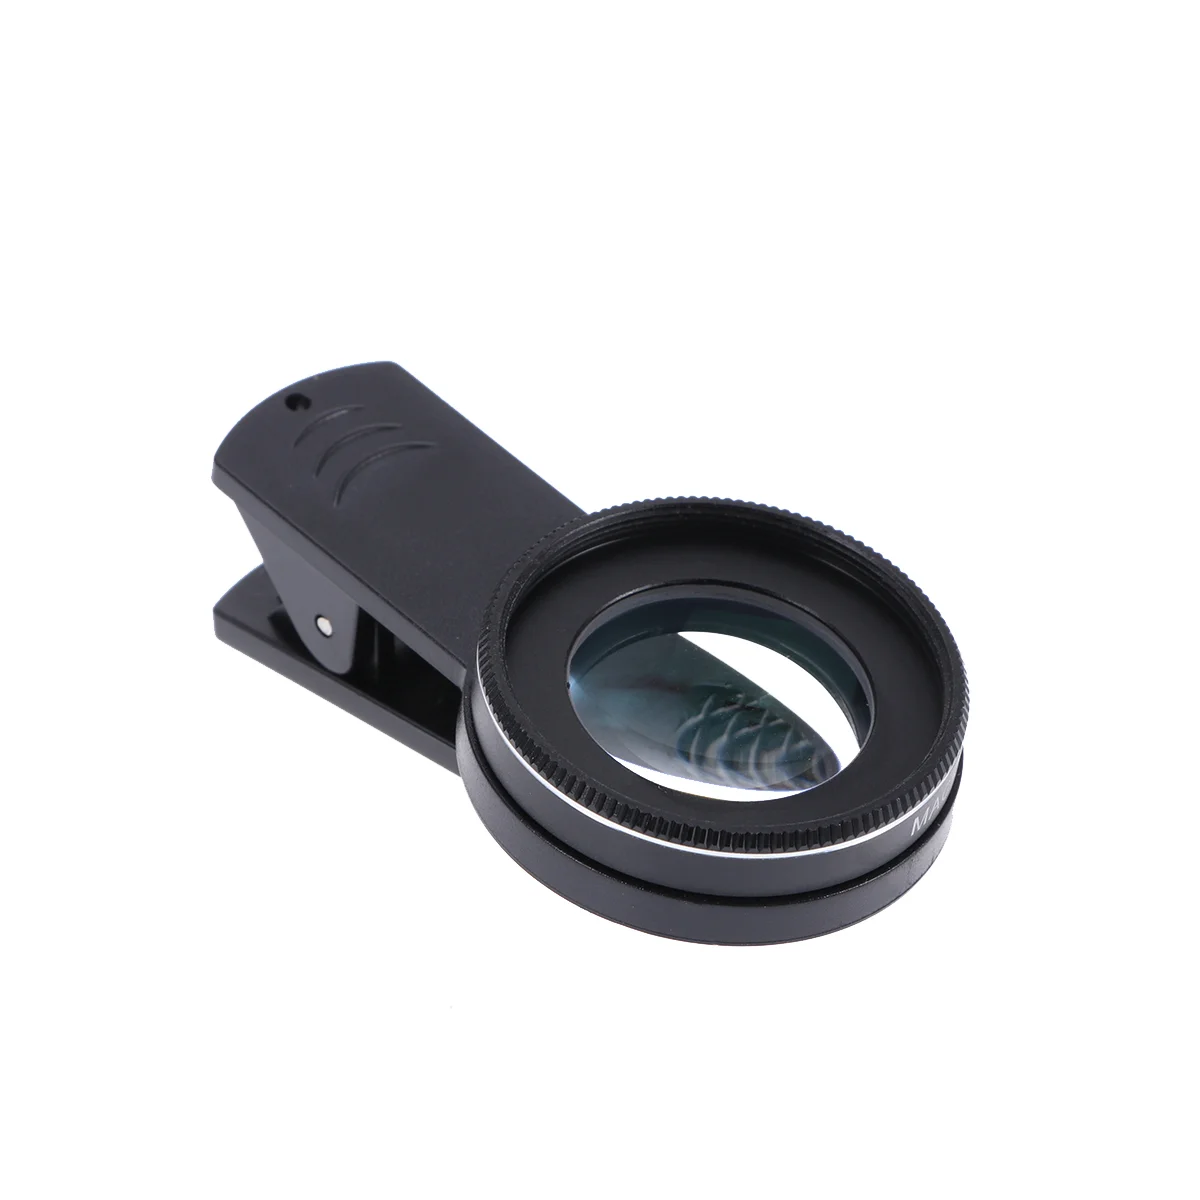 

Lenscamera Cellcellphone Fisheye Macro Eye Fish15Xtelephoto Clip Attachments Magnifying Optic External Wide Angle Telephone Kit